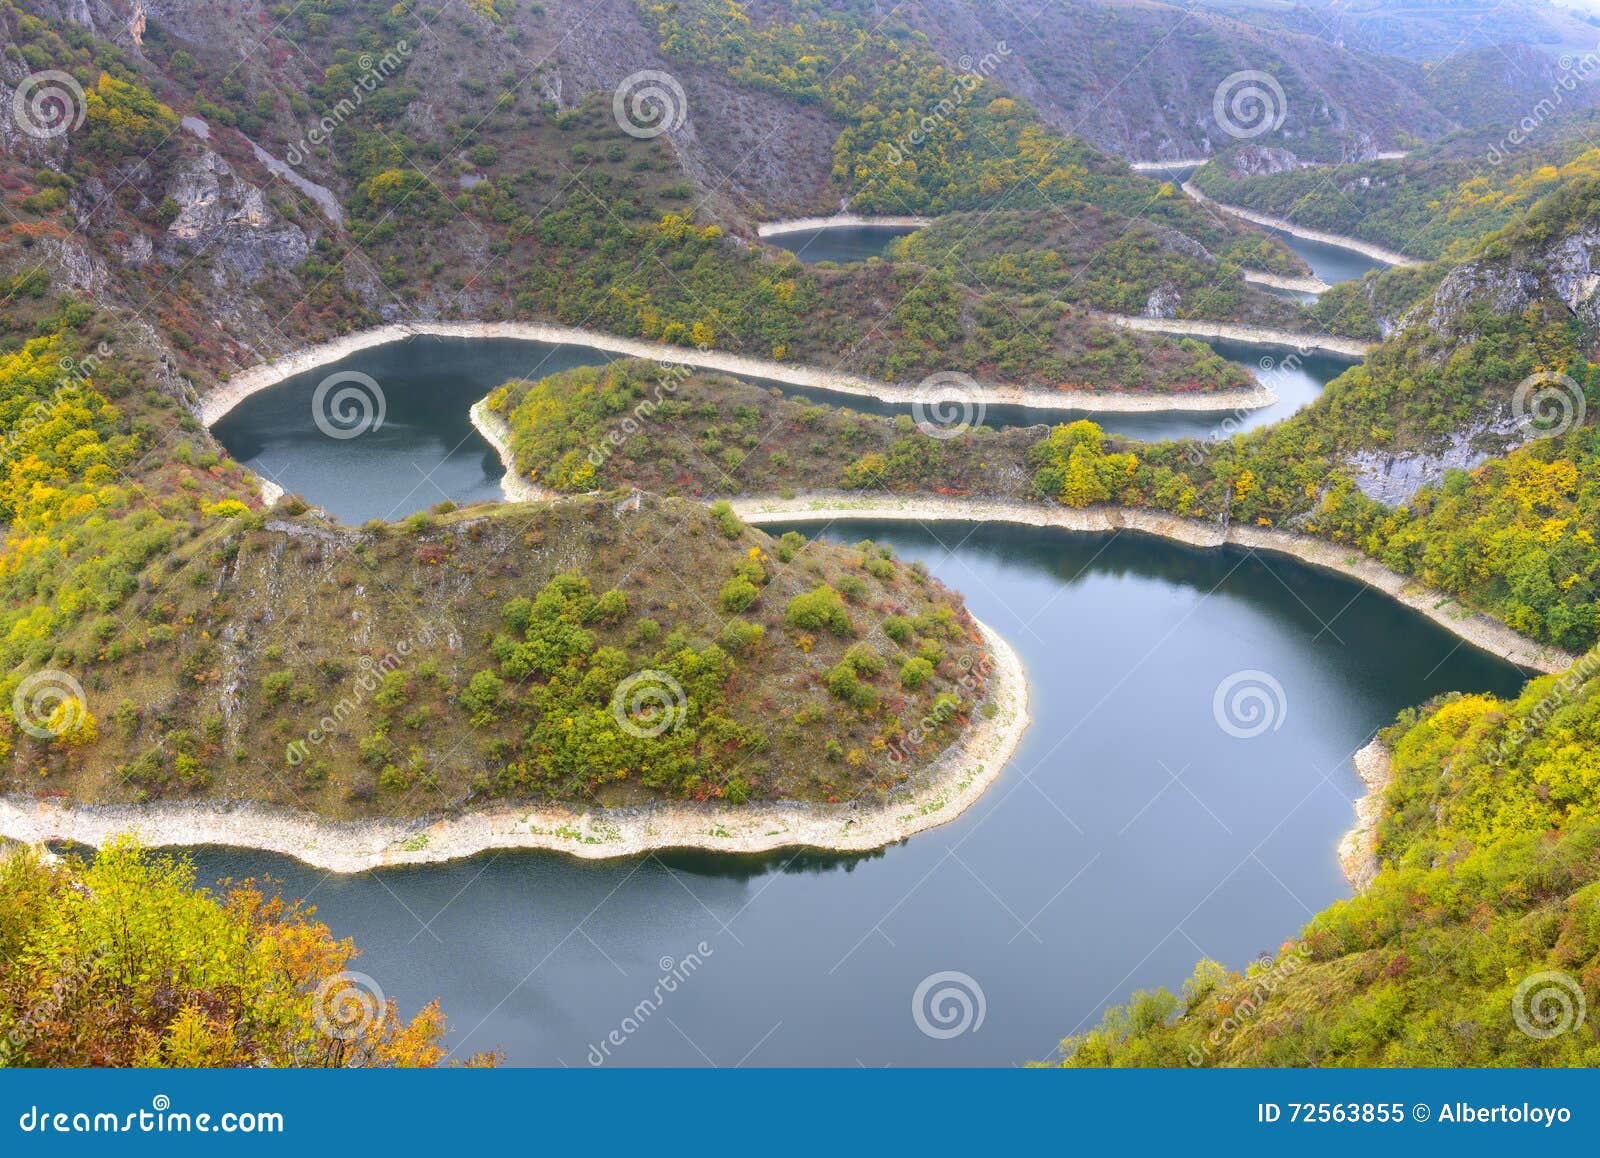 meander of the uvac river, serbia